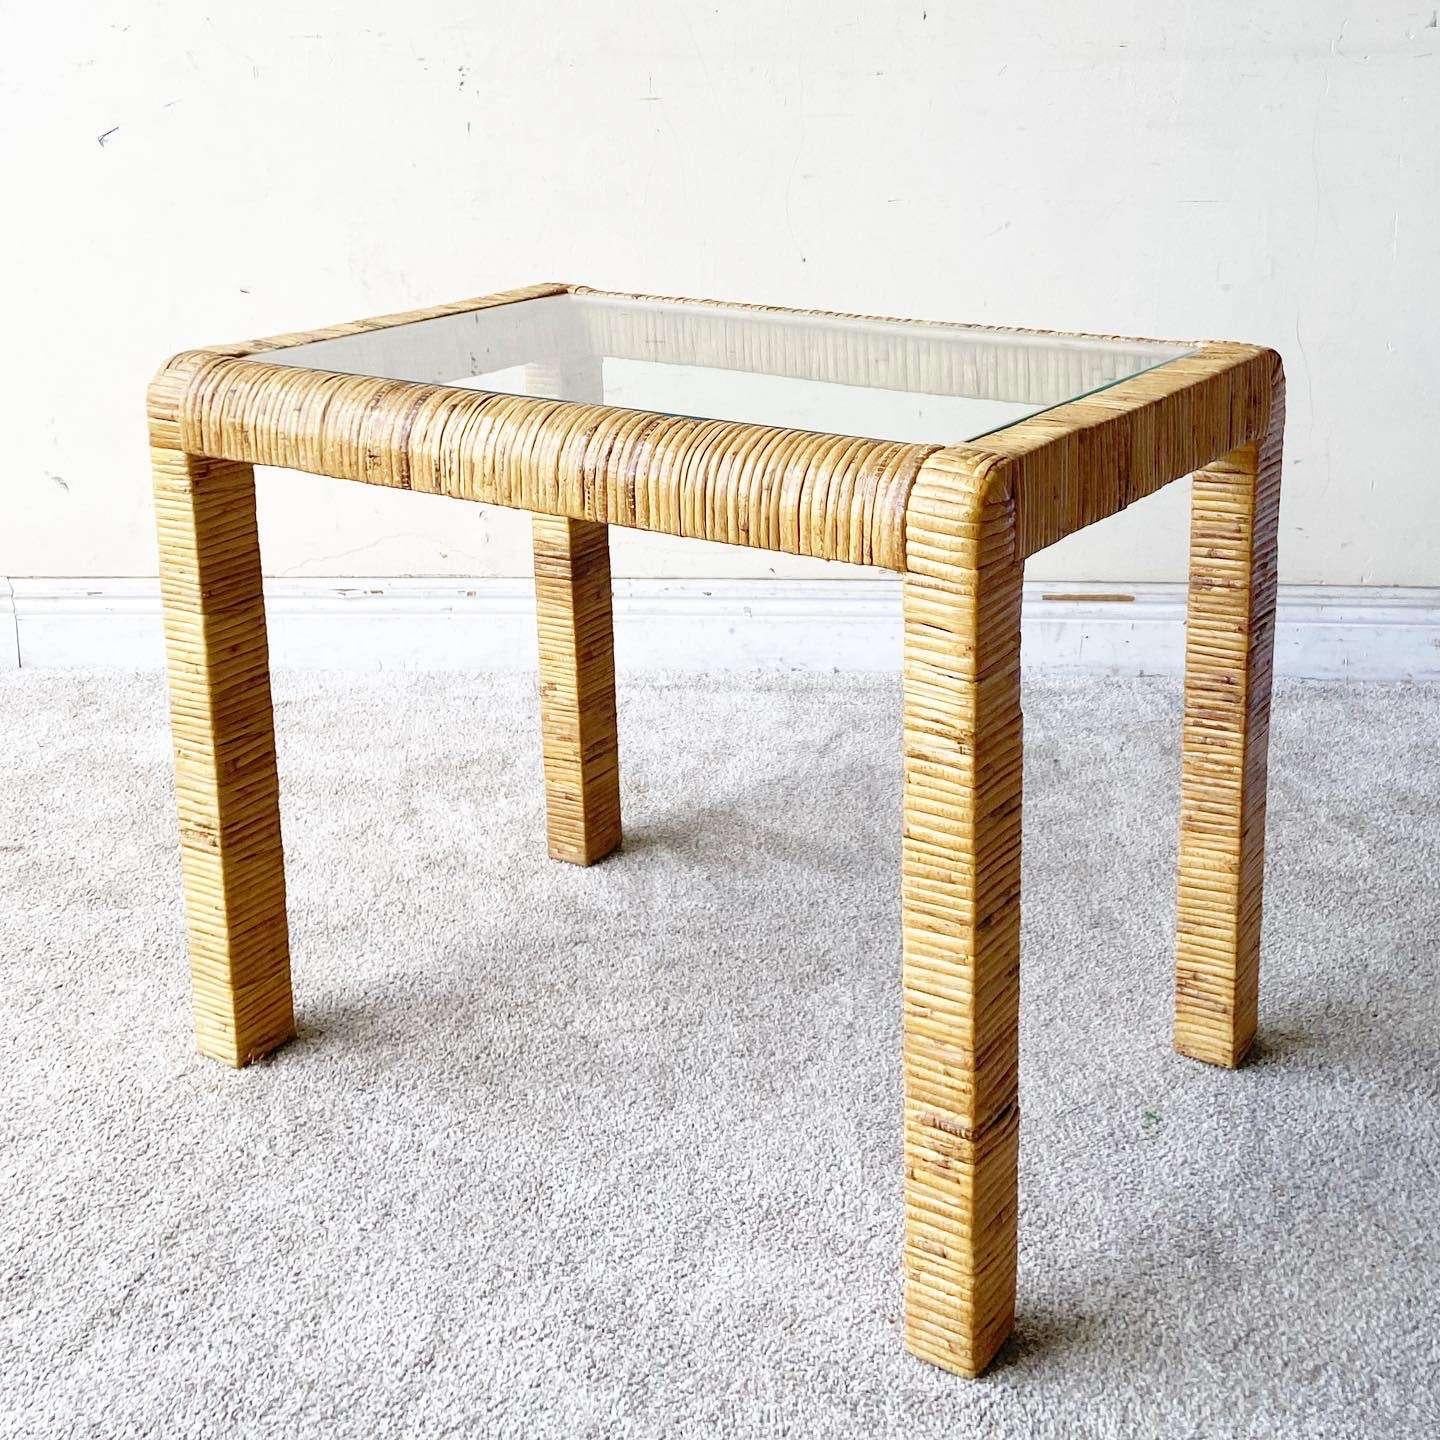 Incredible vintage bohemian glass top side table. Features a fantastic rattan wrapped rectangular frame.